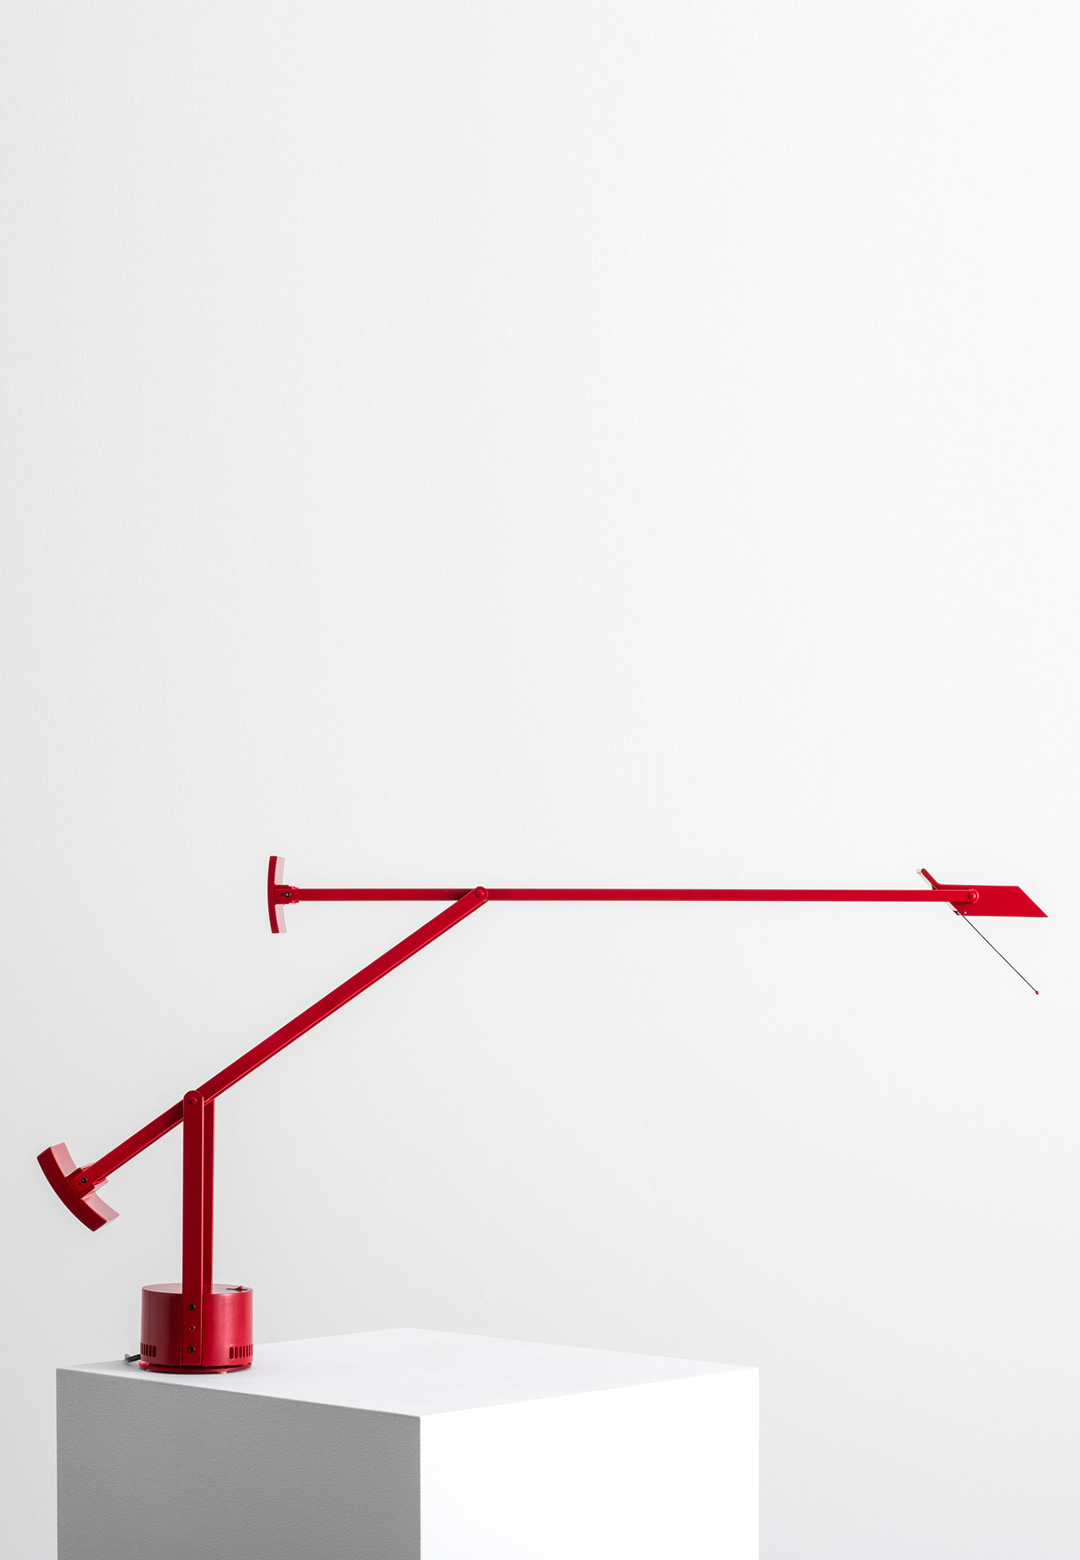 Richard Sapper’s iconic Tizio lamp gets a revamp in red for its 50th anniversary